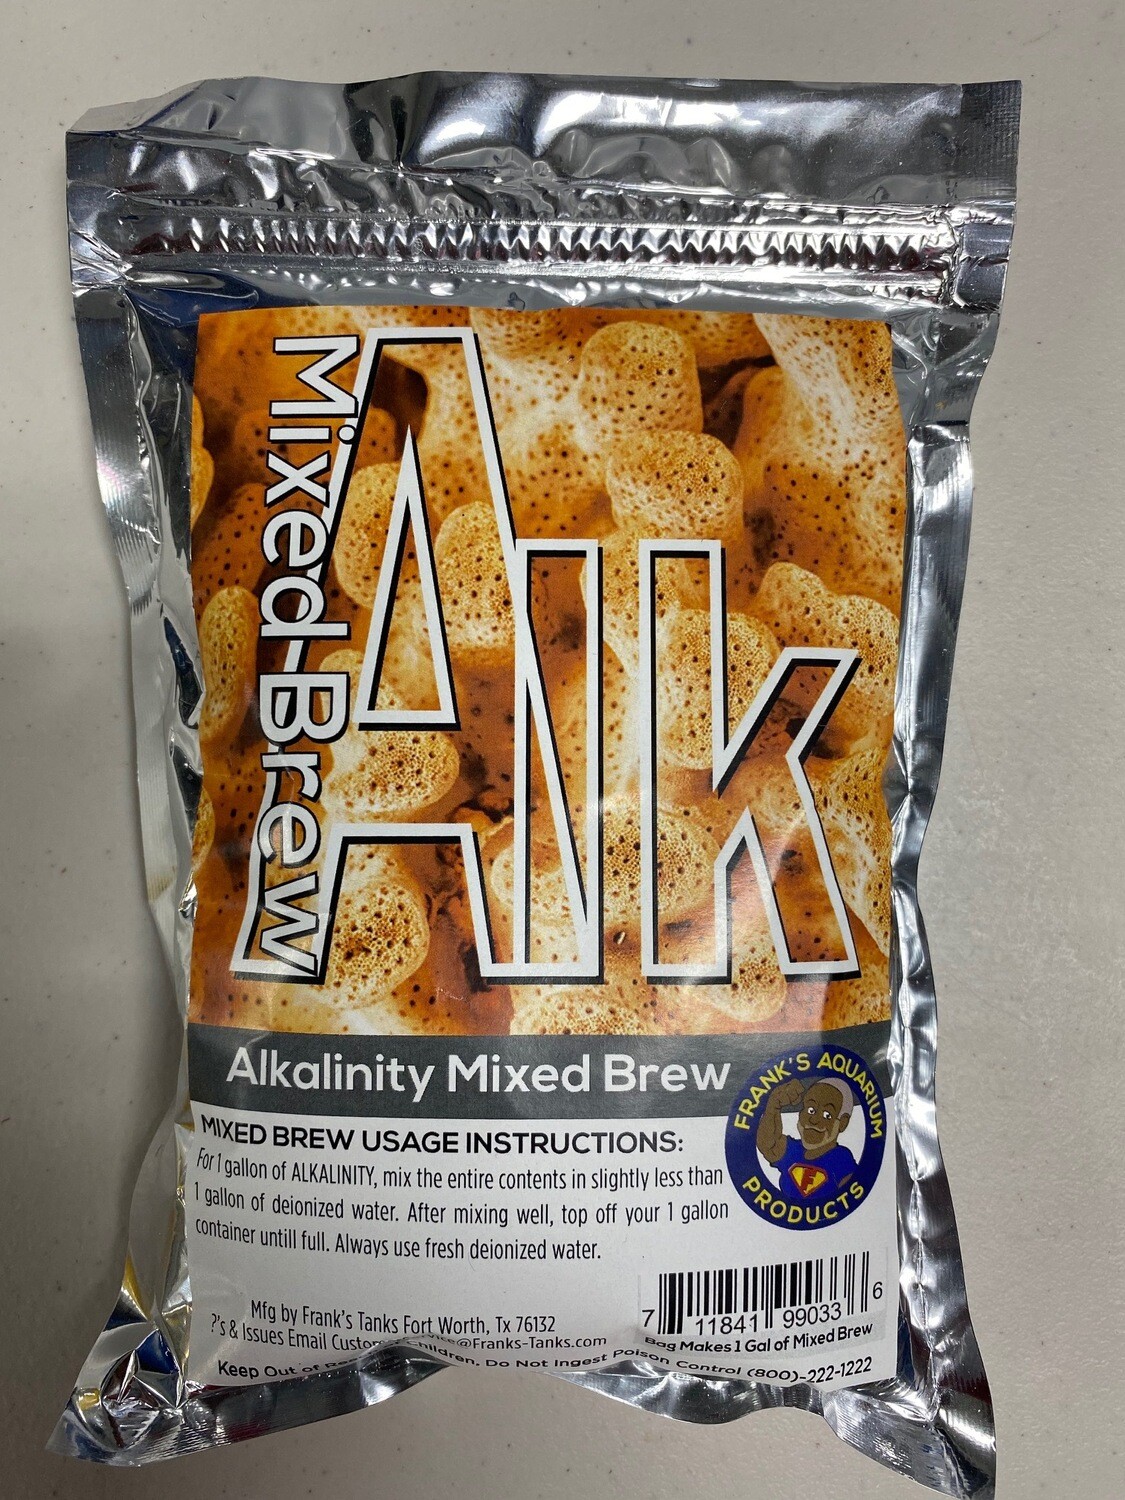 Frank's Tanks 1 gallon mix package of ( Alkalinity ) Mixed Brew